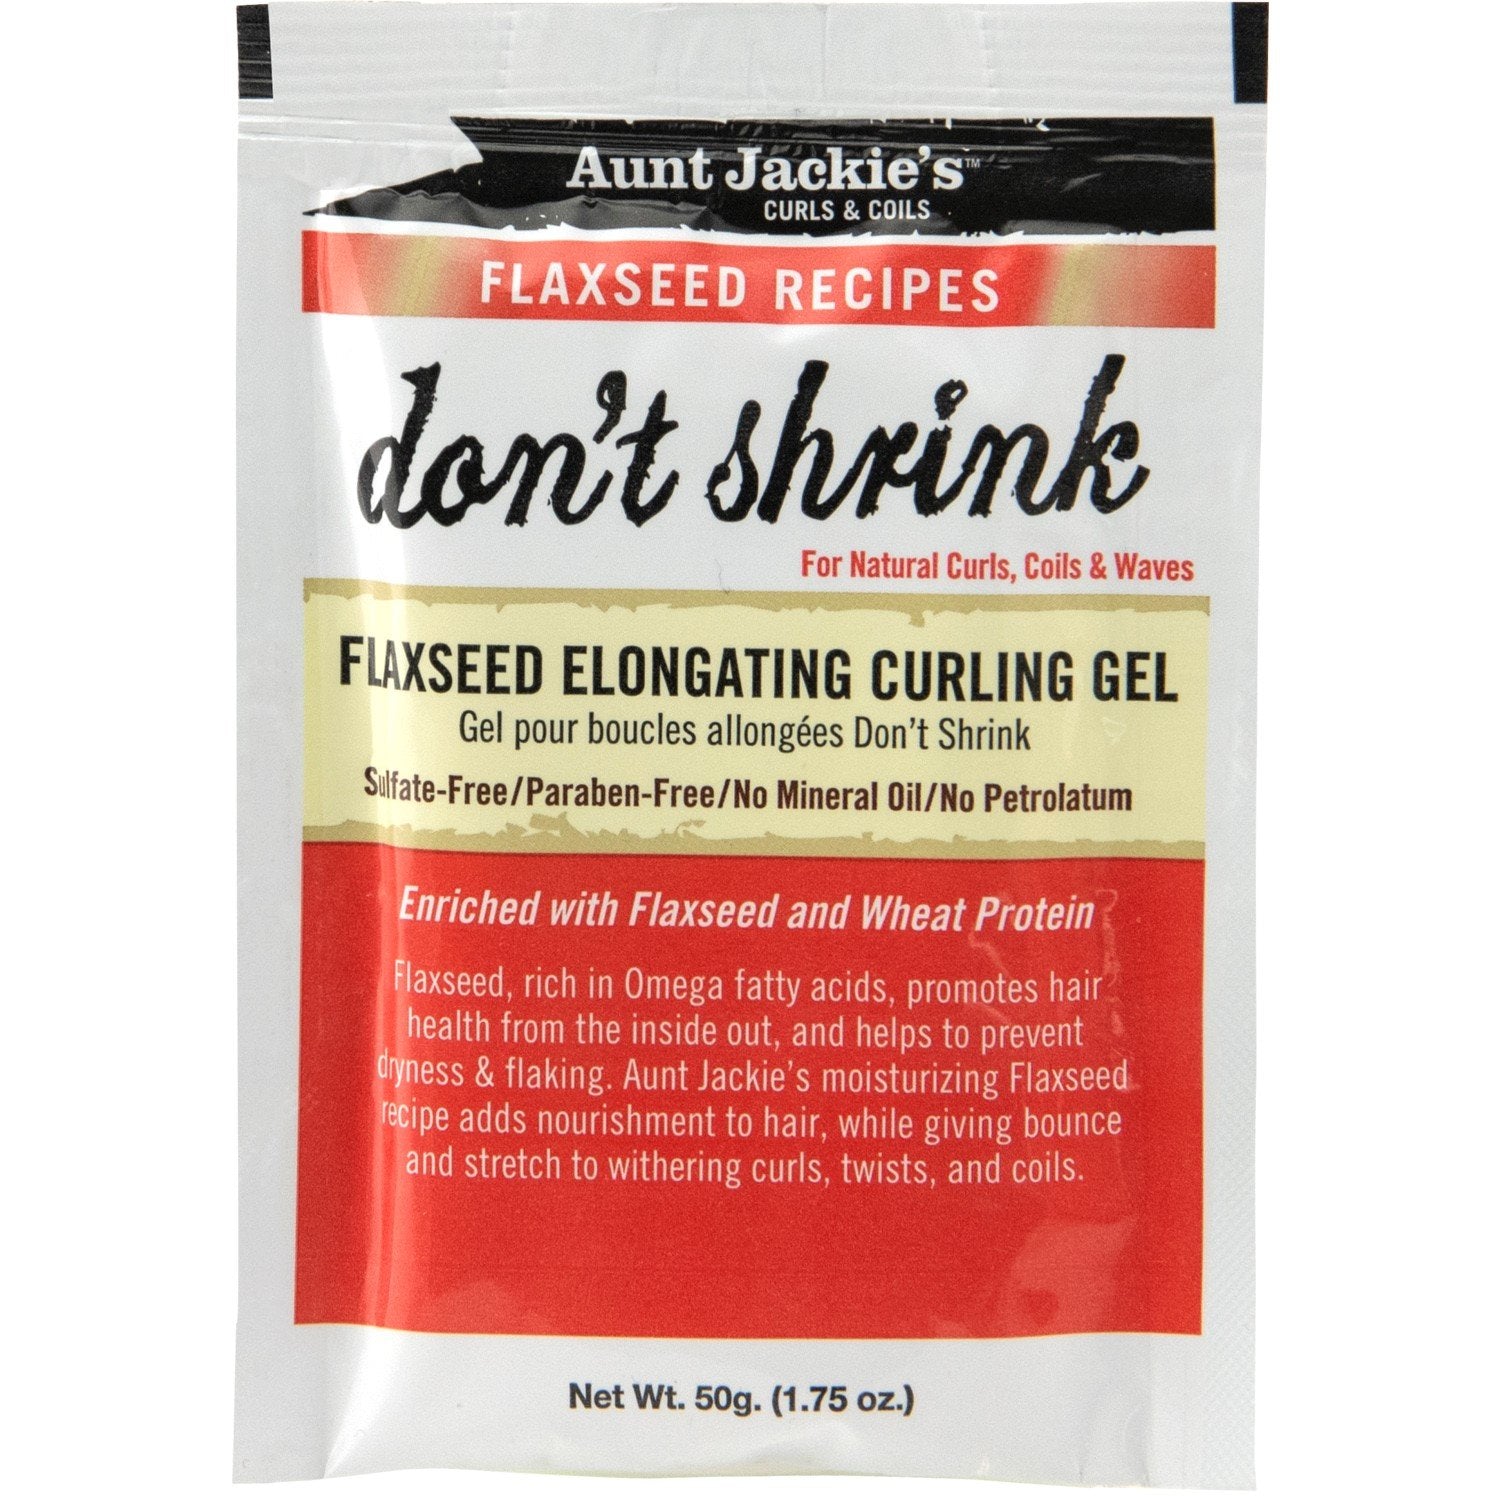 Aunt Jackie's Don't Shrink Elongating Flaxseed Gel - 1.75oz - 4th Ave Market